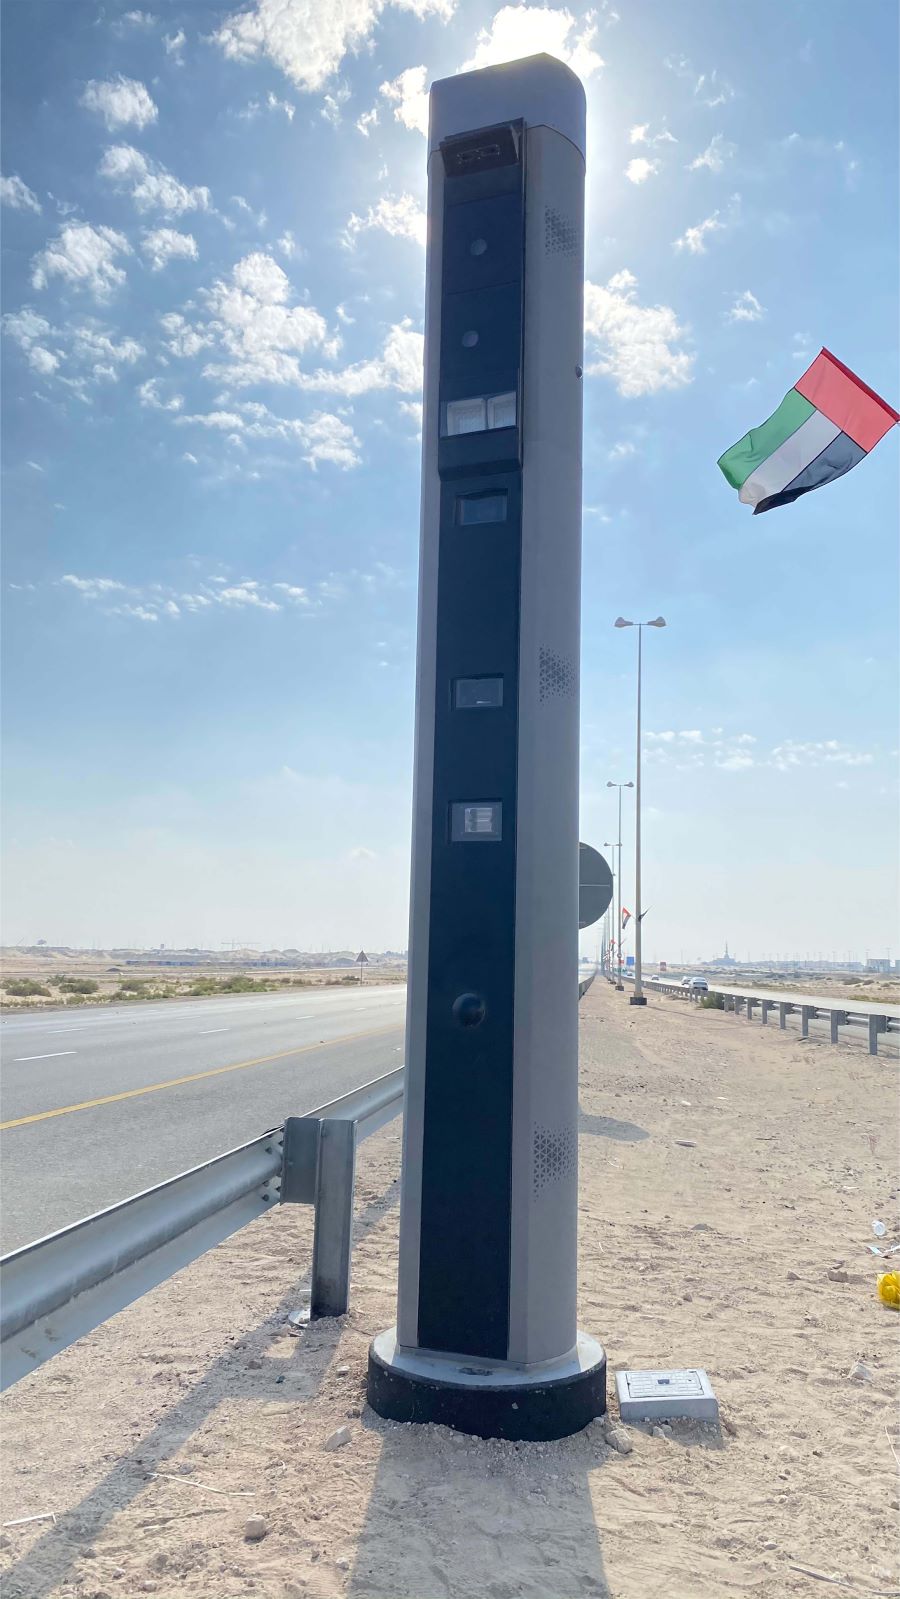 Abu Dhabi Police Selects IDEMIA Technology To Further Promote Road Safety